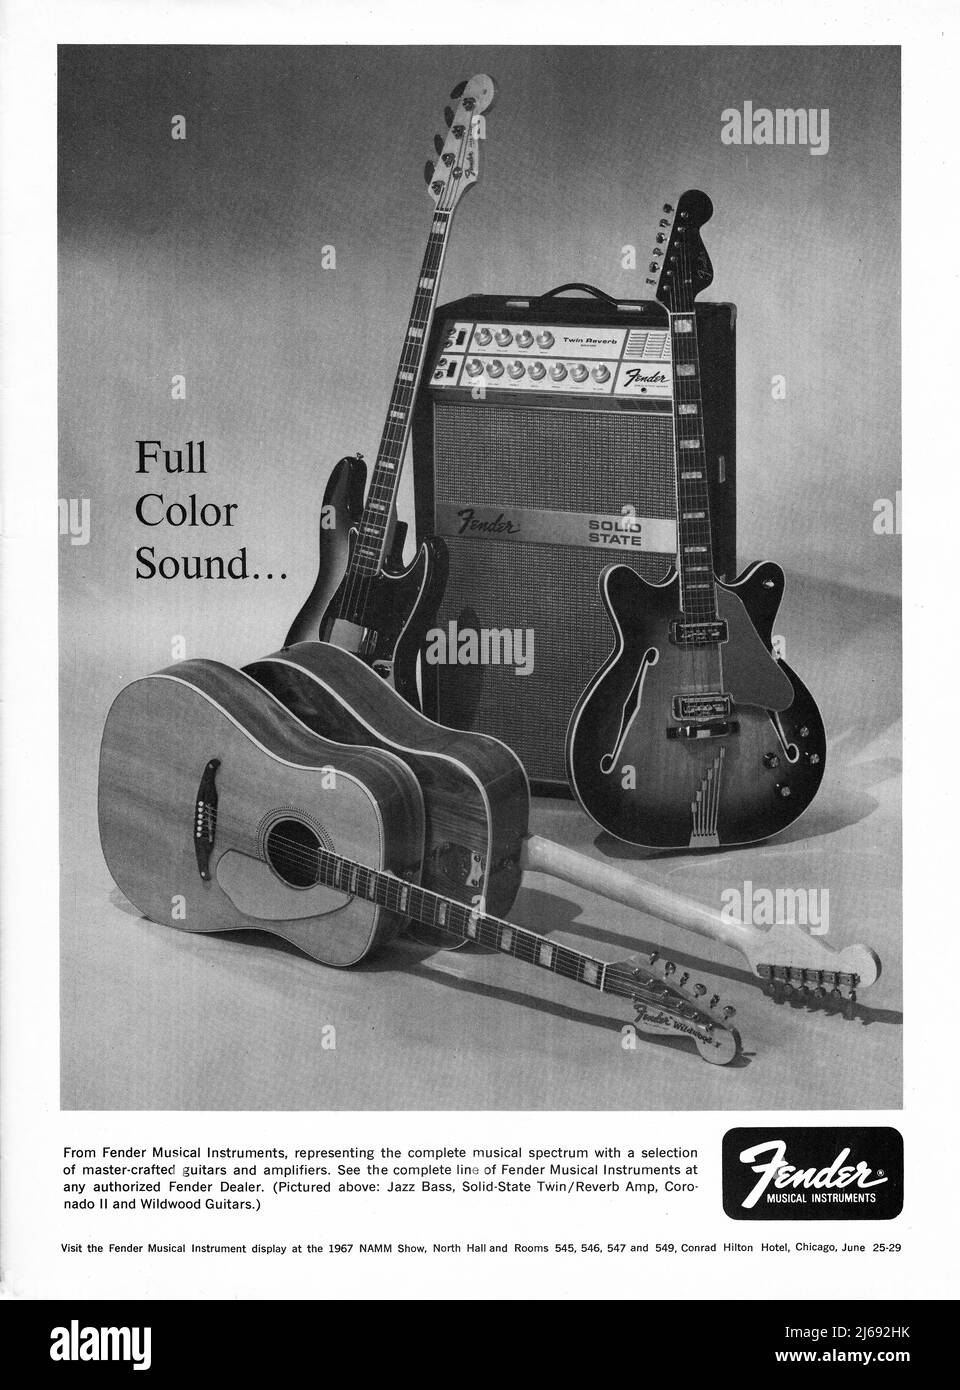 An ad for Fender acoustic & electric guitars and amplifiers. It claims a 'full color sound.' From a late 1960s magazine. Stock Photo